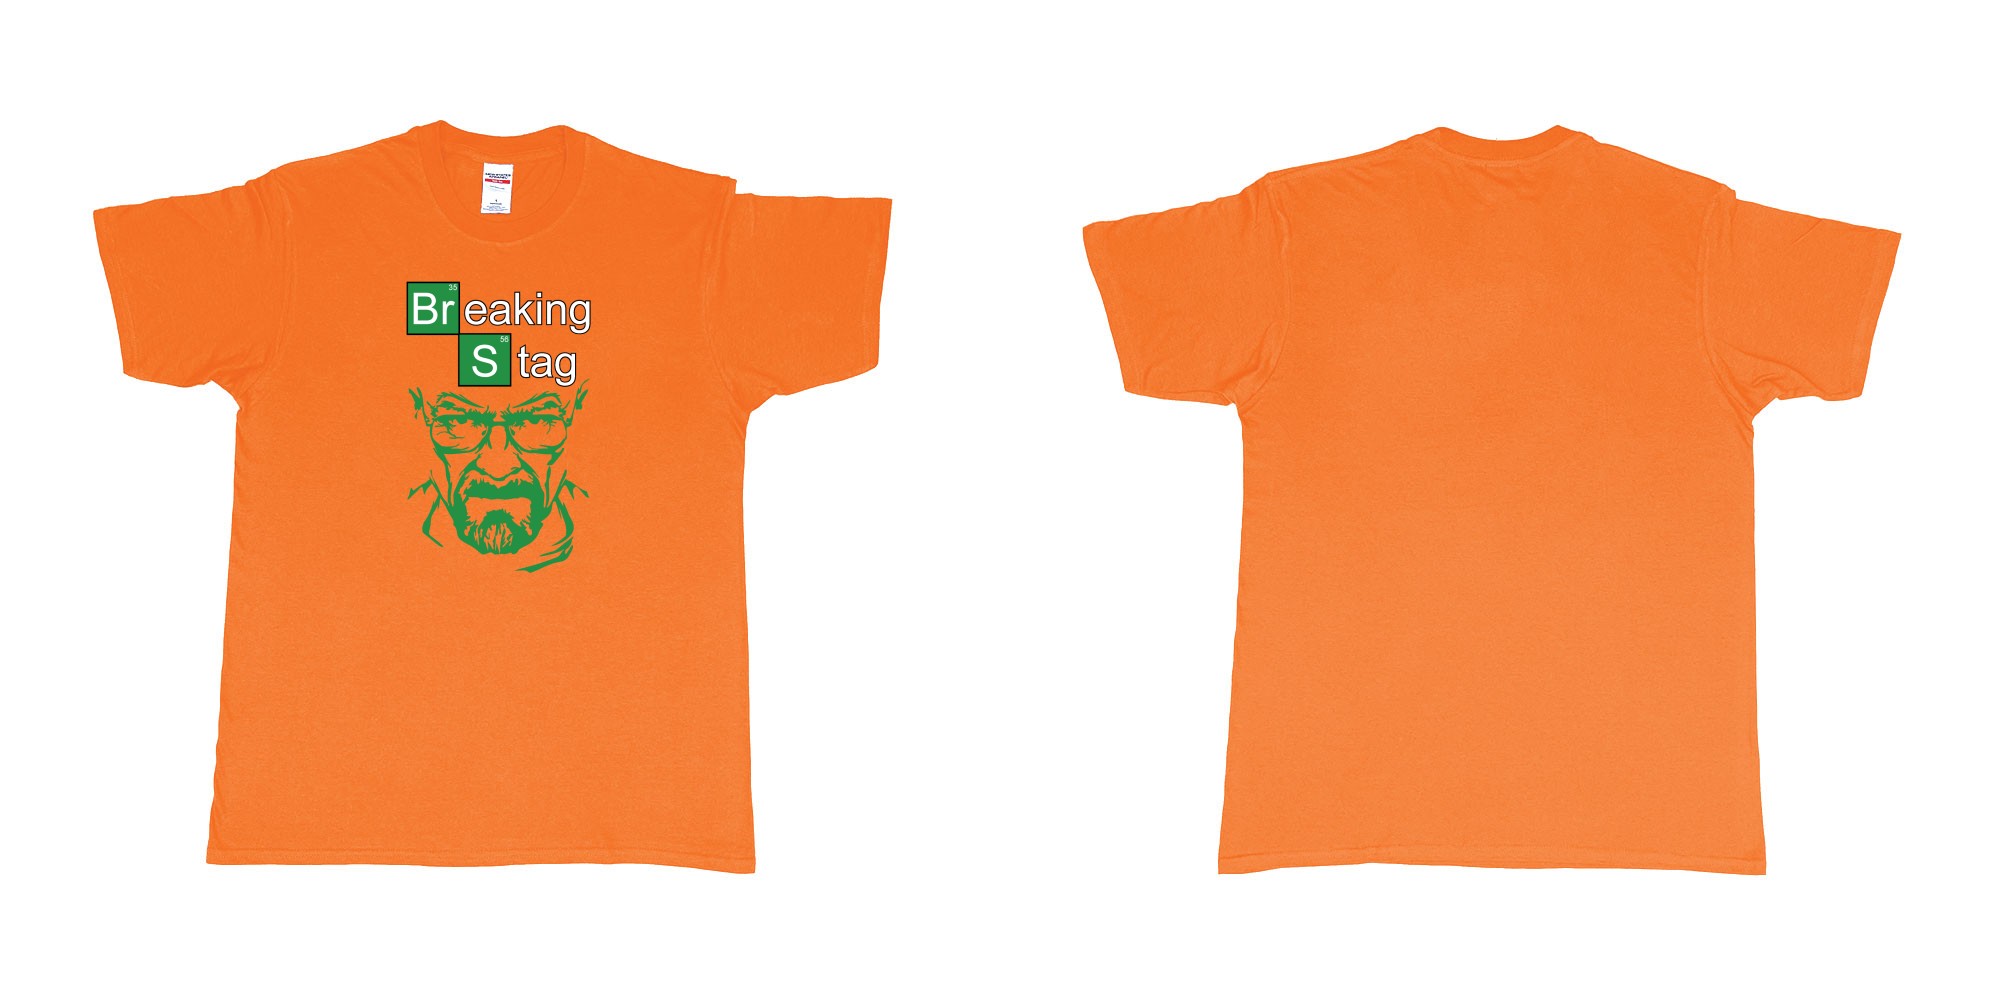 Custom tshirt design TPW Braking Bad Stag in fabric color orange choice your own text made in Bali by The Pirate Way